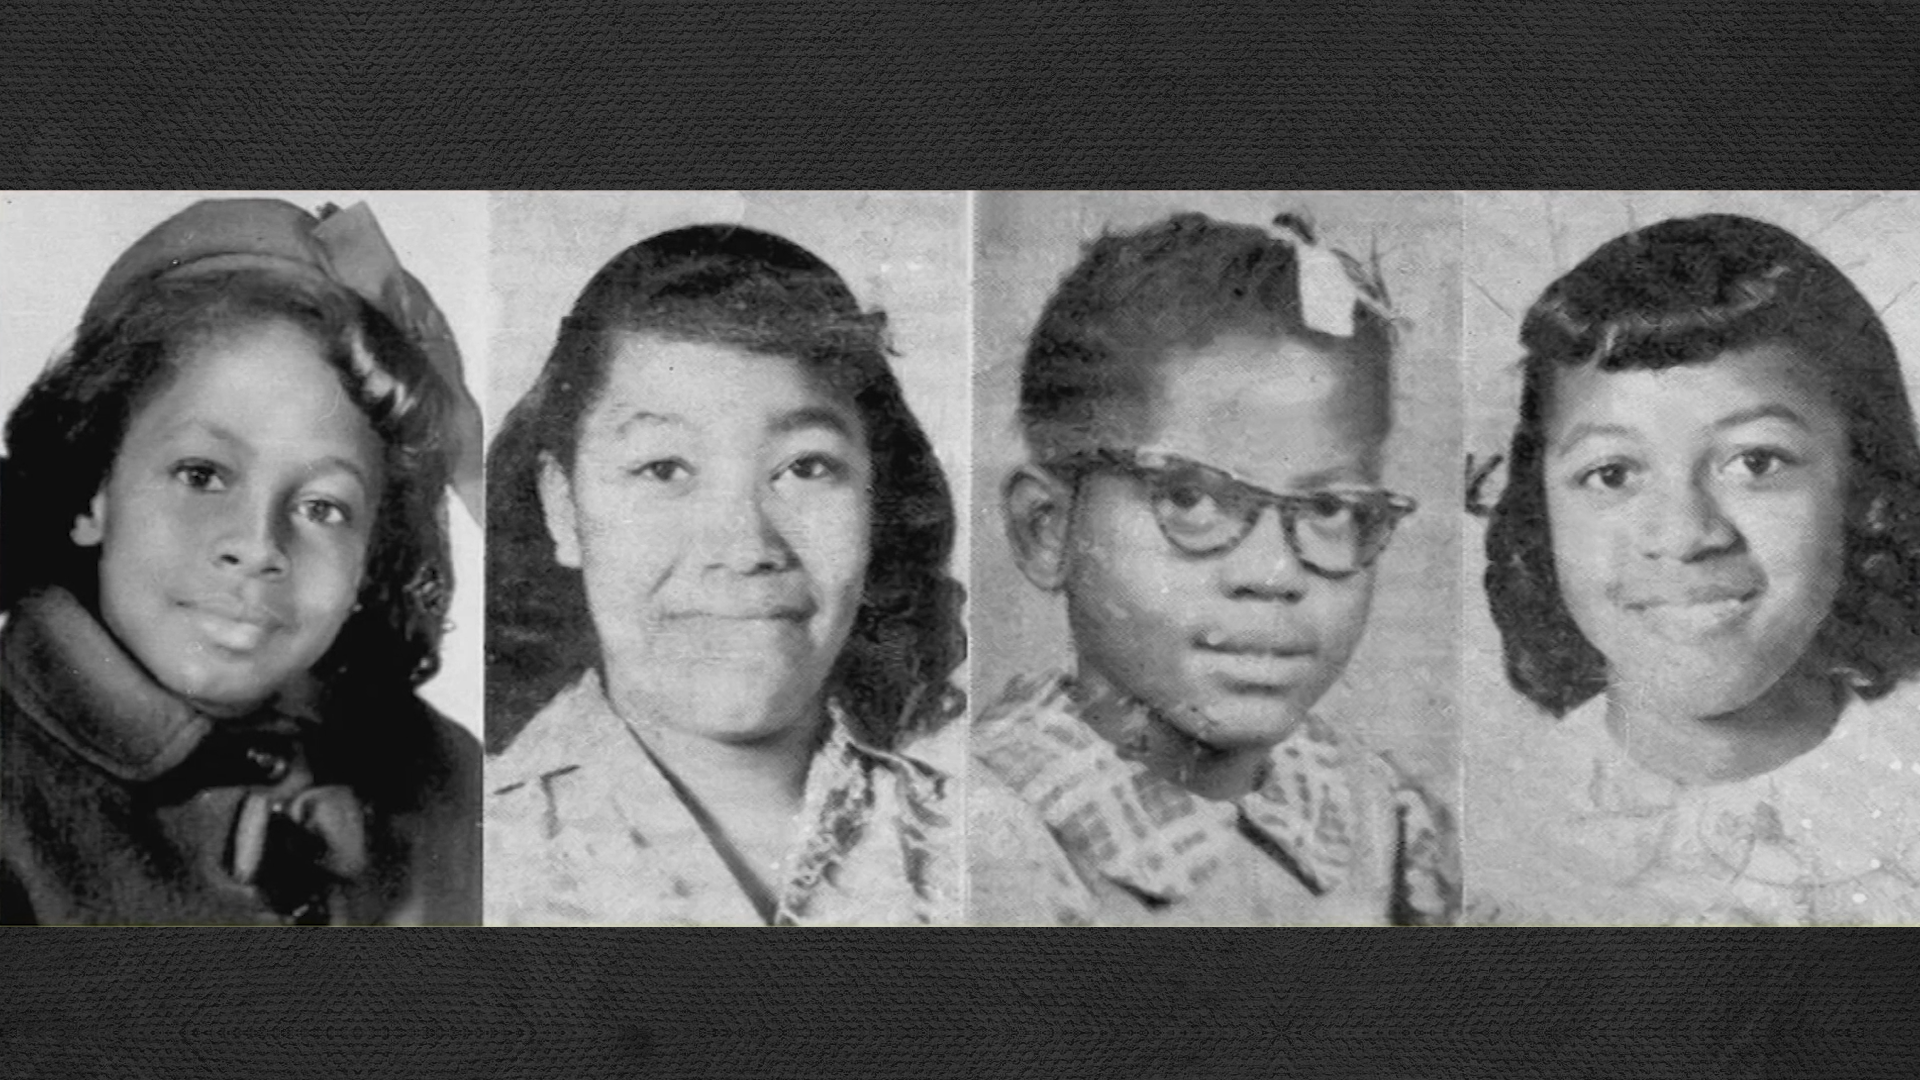 Carole Robertson (14), Carol Denise McNair (11), Addie Mae Collins (14), and Cynthia Wesley (14) were the 4 little girls killed in the 1963 16th Street Baptist Church bombing.